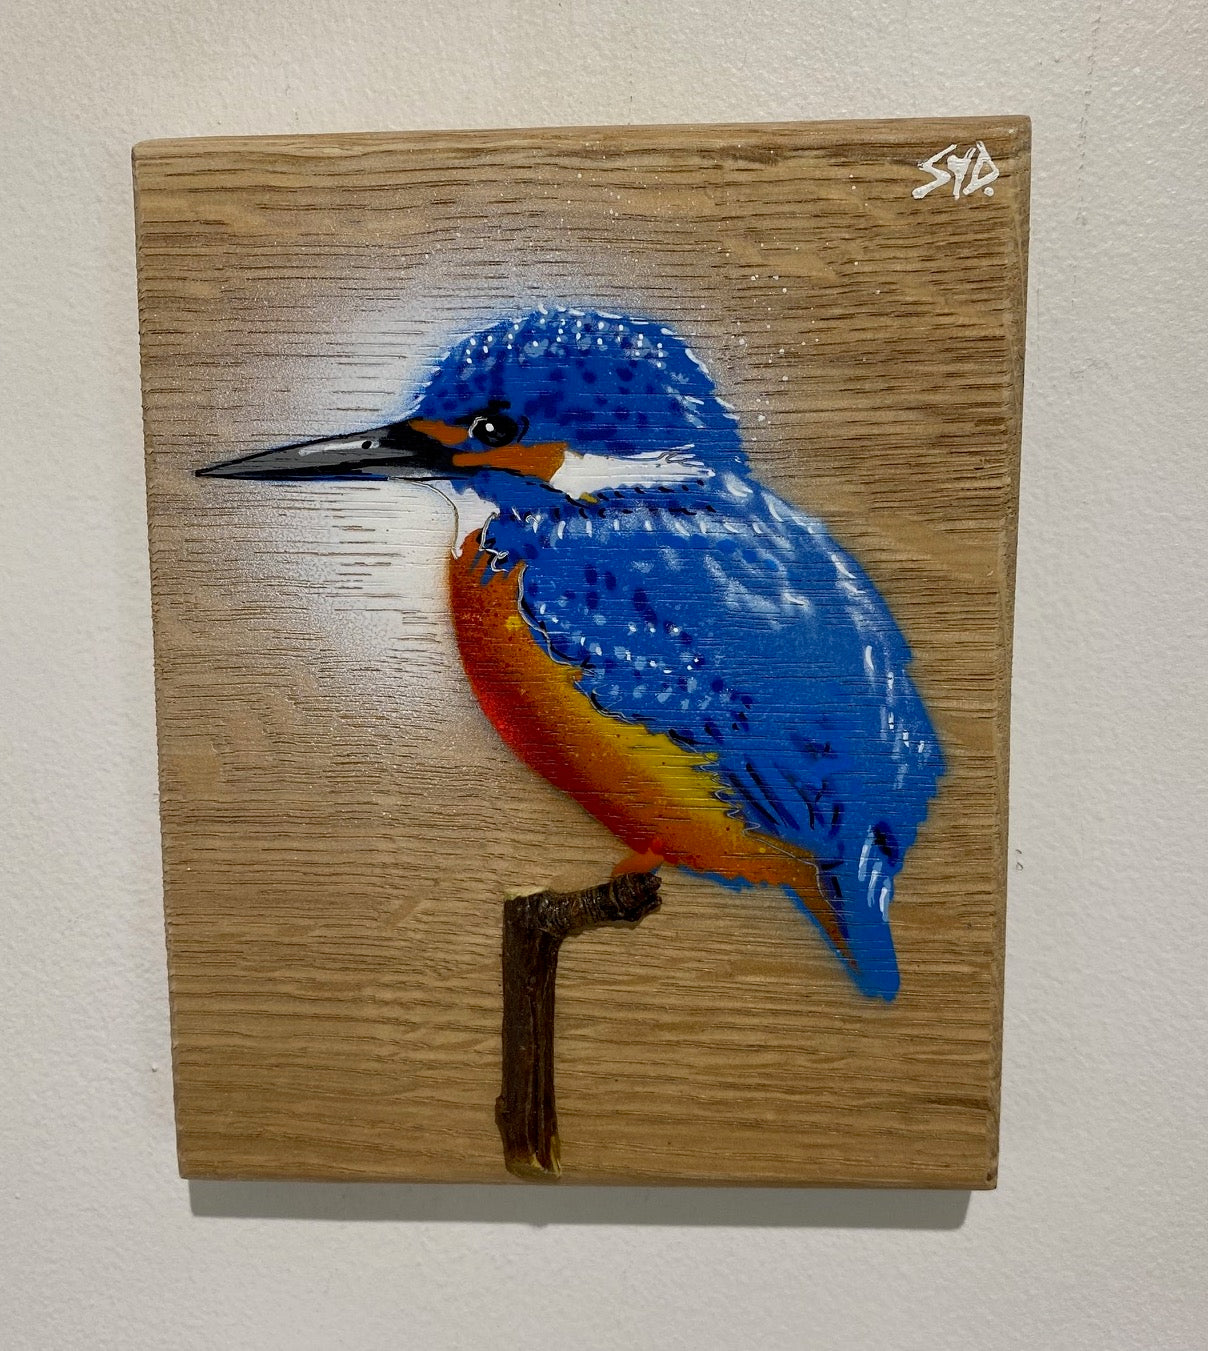 'Kingfisher 2023' - On Oak wood - New Limited Edition Signed artwork size 13 x 17cm No. 2